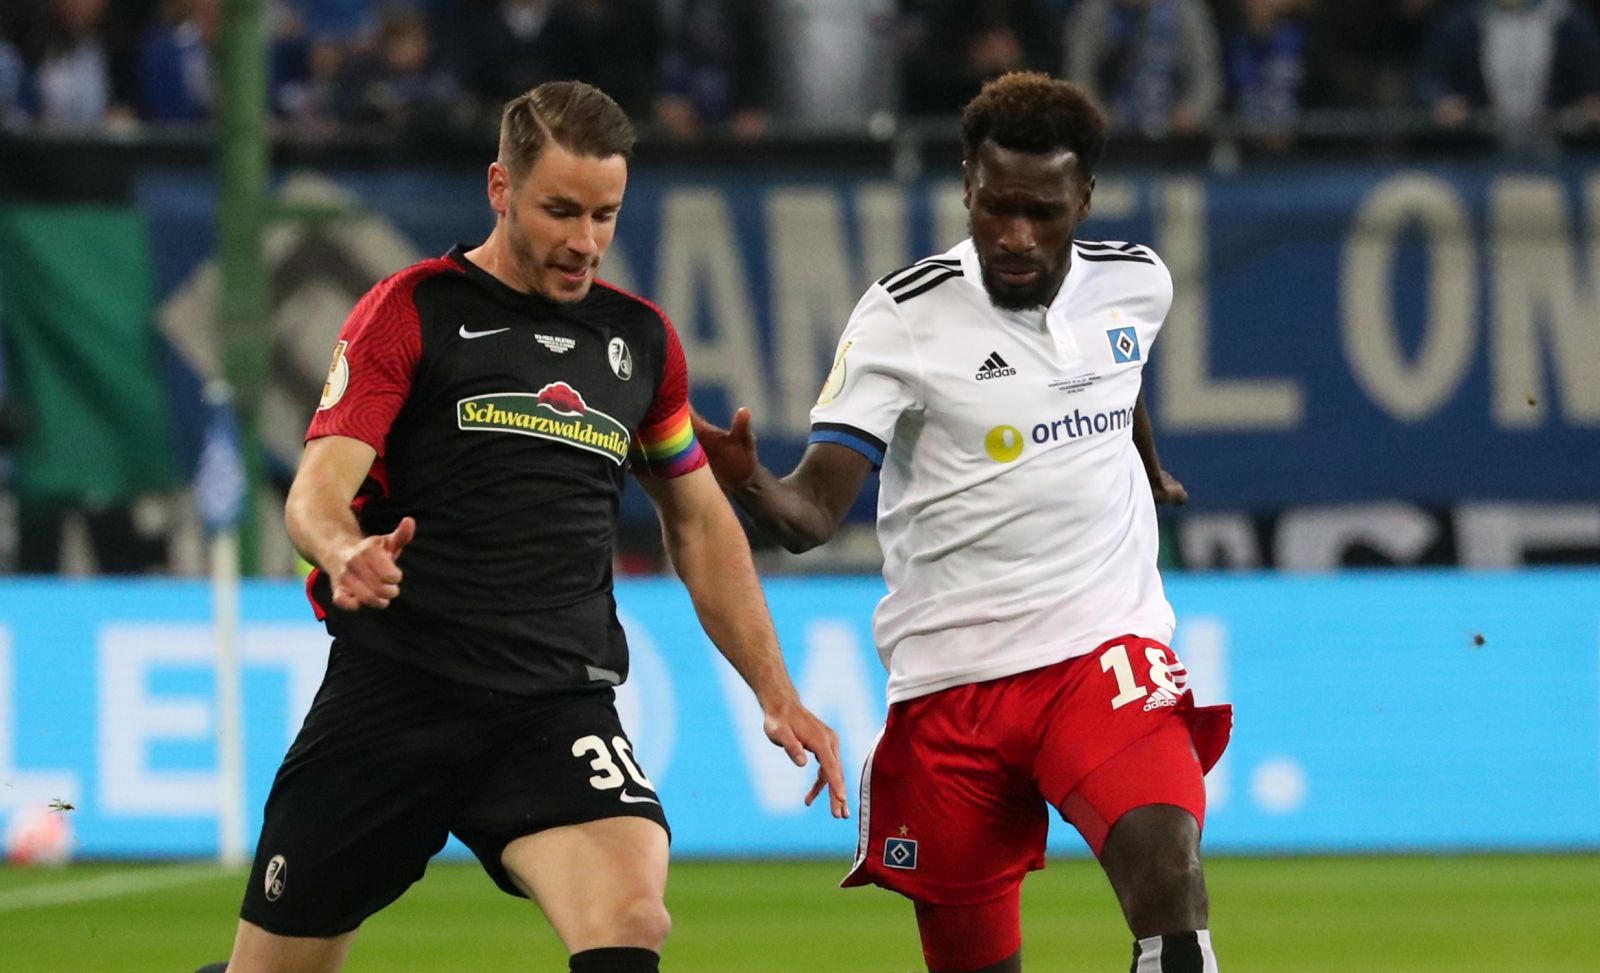 epa09897652 Hamburg’s Bakery Jatta (R) in action against Freiburg's Christian Guenter (L) during the German DFB Cup semi final soccer match between Hamburger SV and SC Freiburg in Hamburg, Germany, 19 April 2022.  EPA/FOCKE STRANGMANN CONDITIONS - ATTENTION: The DFB regulations prohibit any use of photographs as image sequences and/or quasi-video.